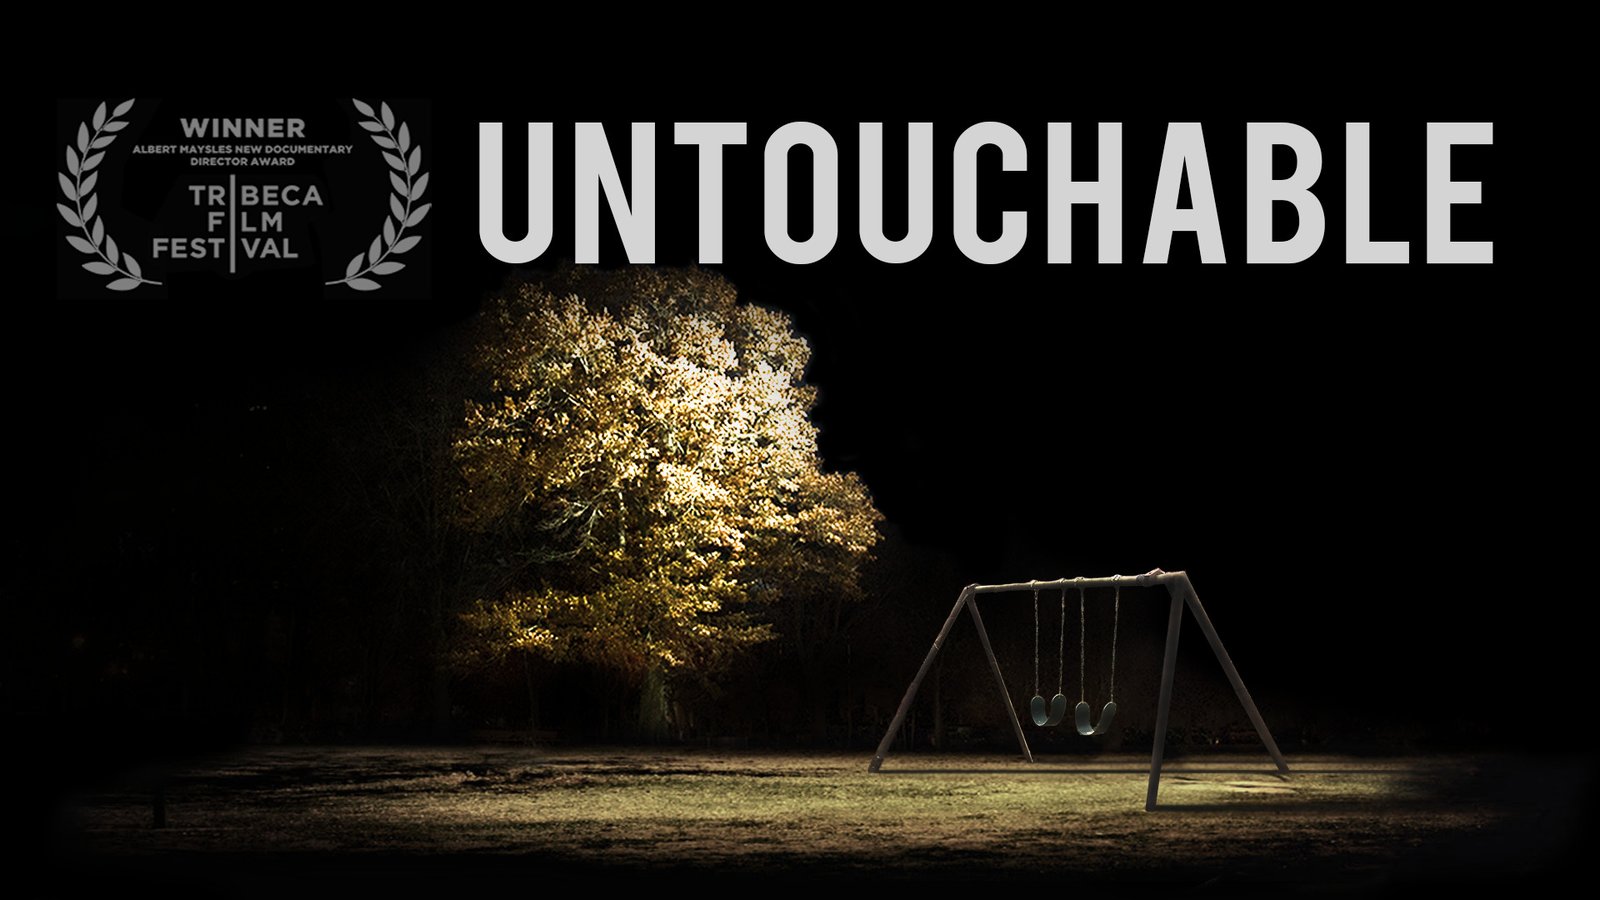 Untouchable - America's Crusade Against Sex Offenders